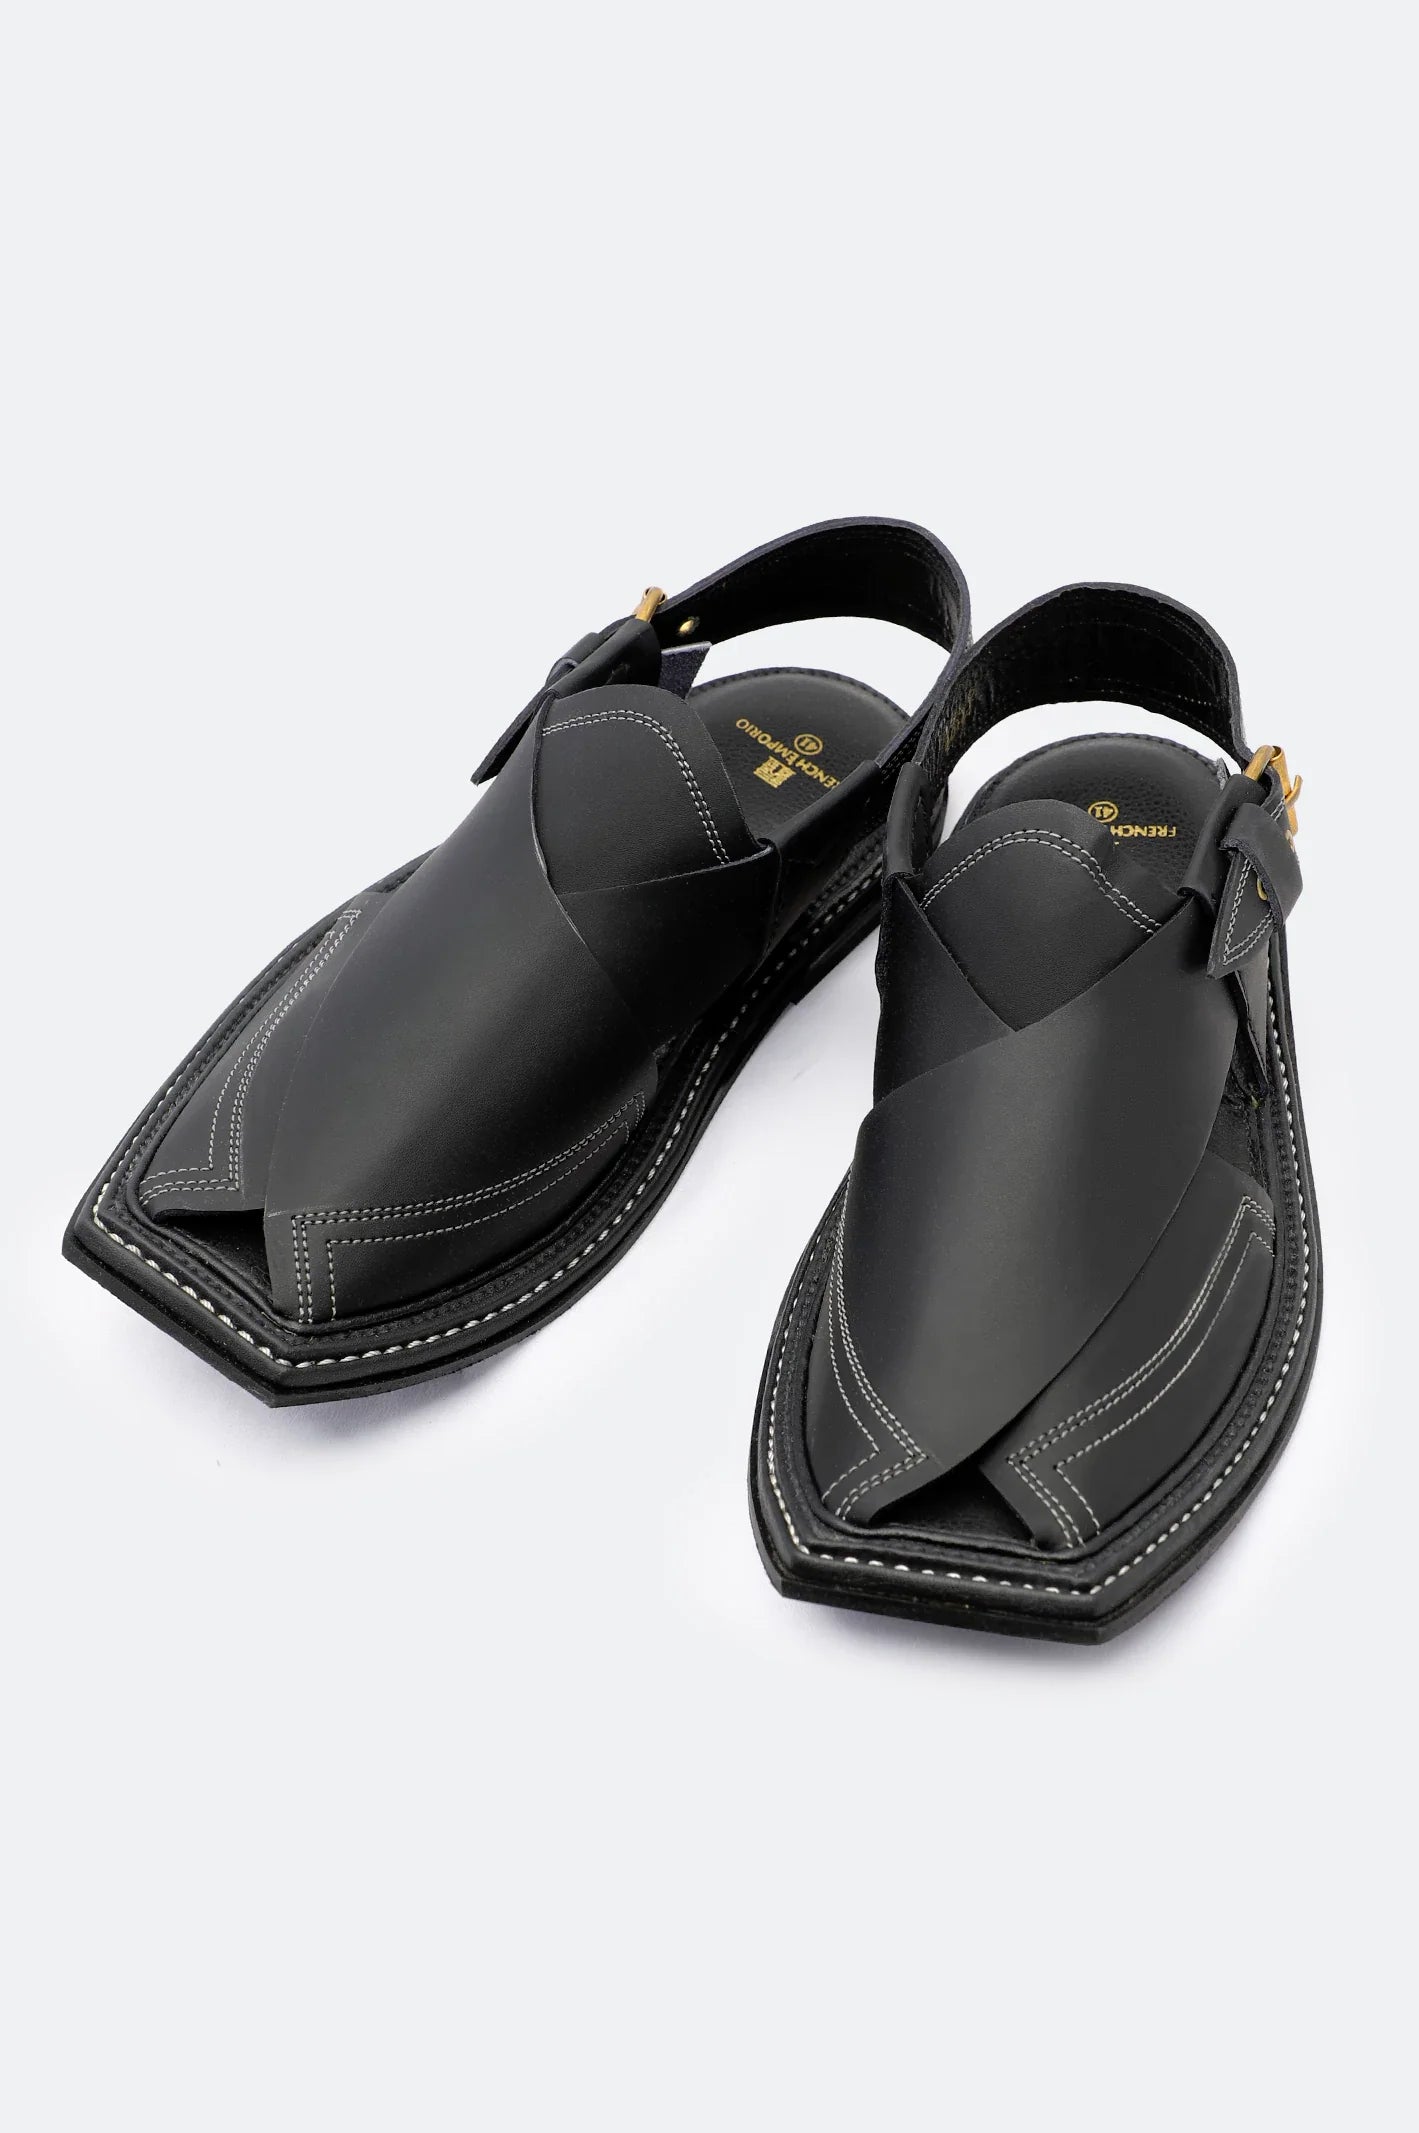 Black French Emporio Men's Sandal From French Emporio By Diners